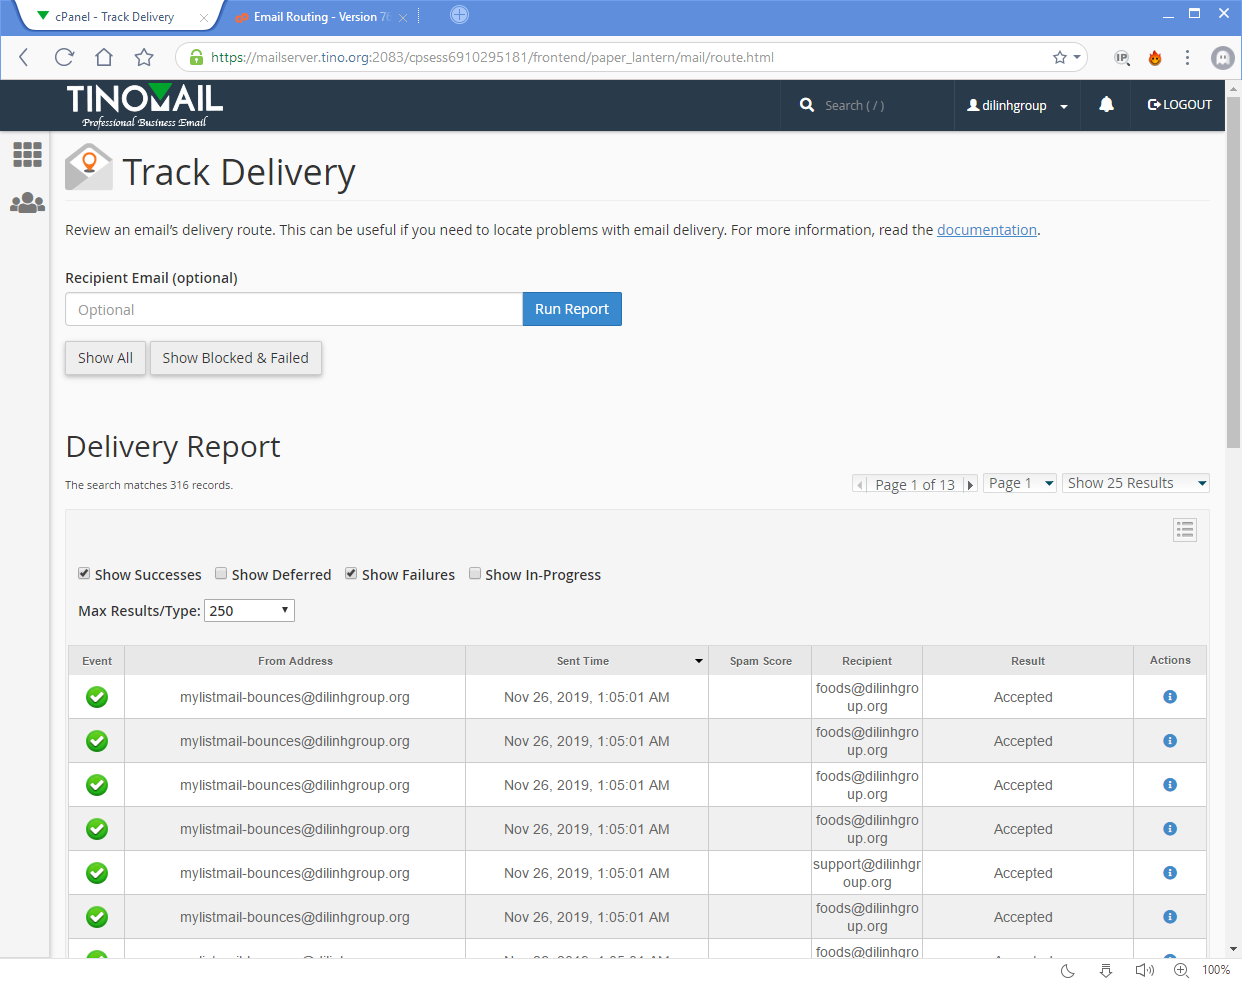 [cPanel] - Track Delivery 4